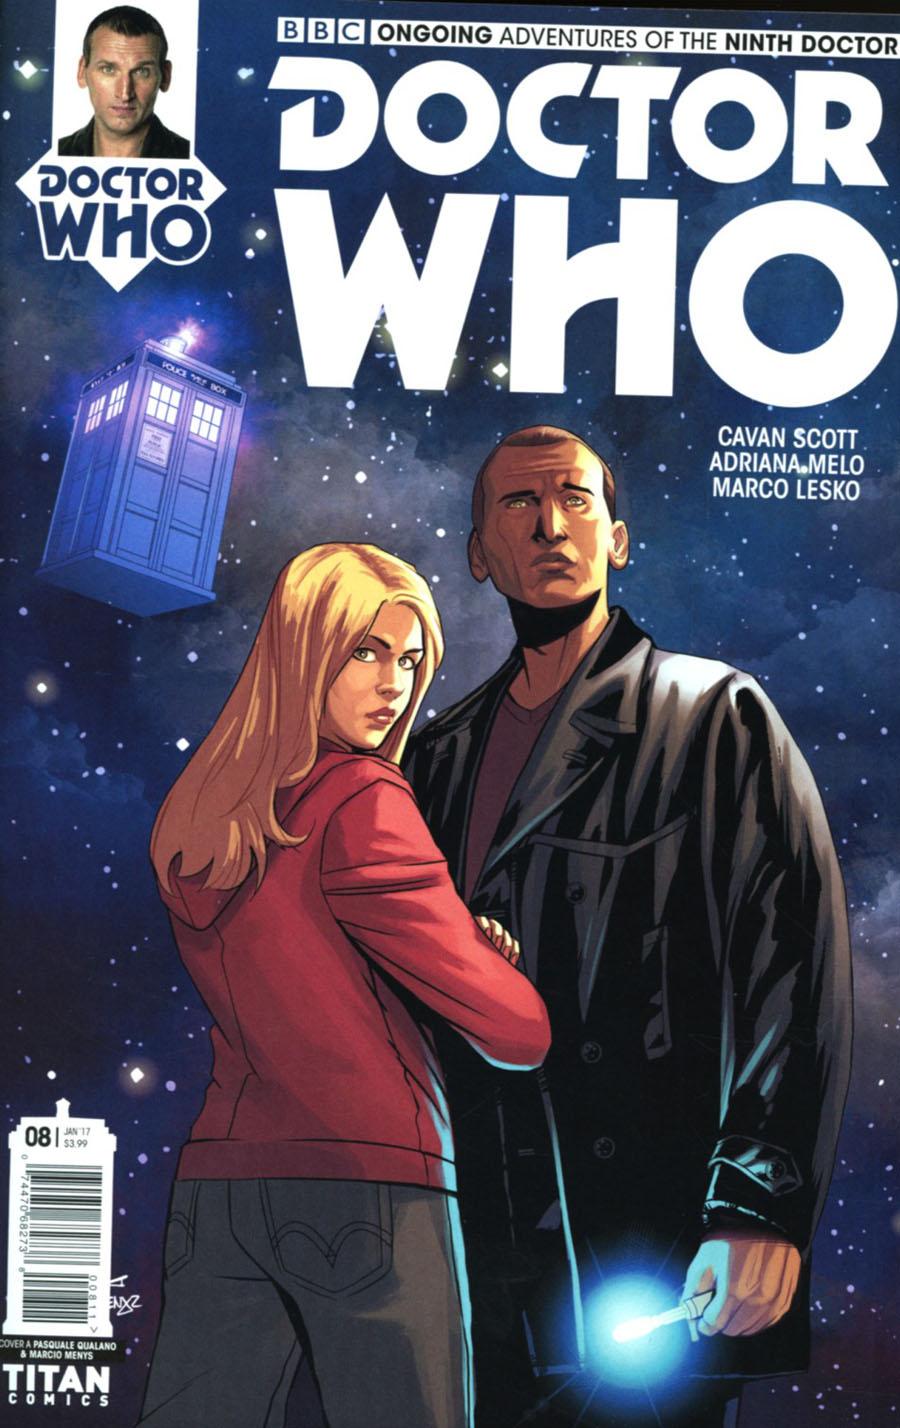 Doctor Who 9th Doctor Vol. 2 #8